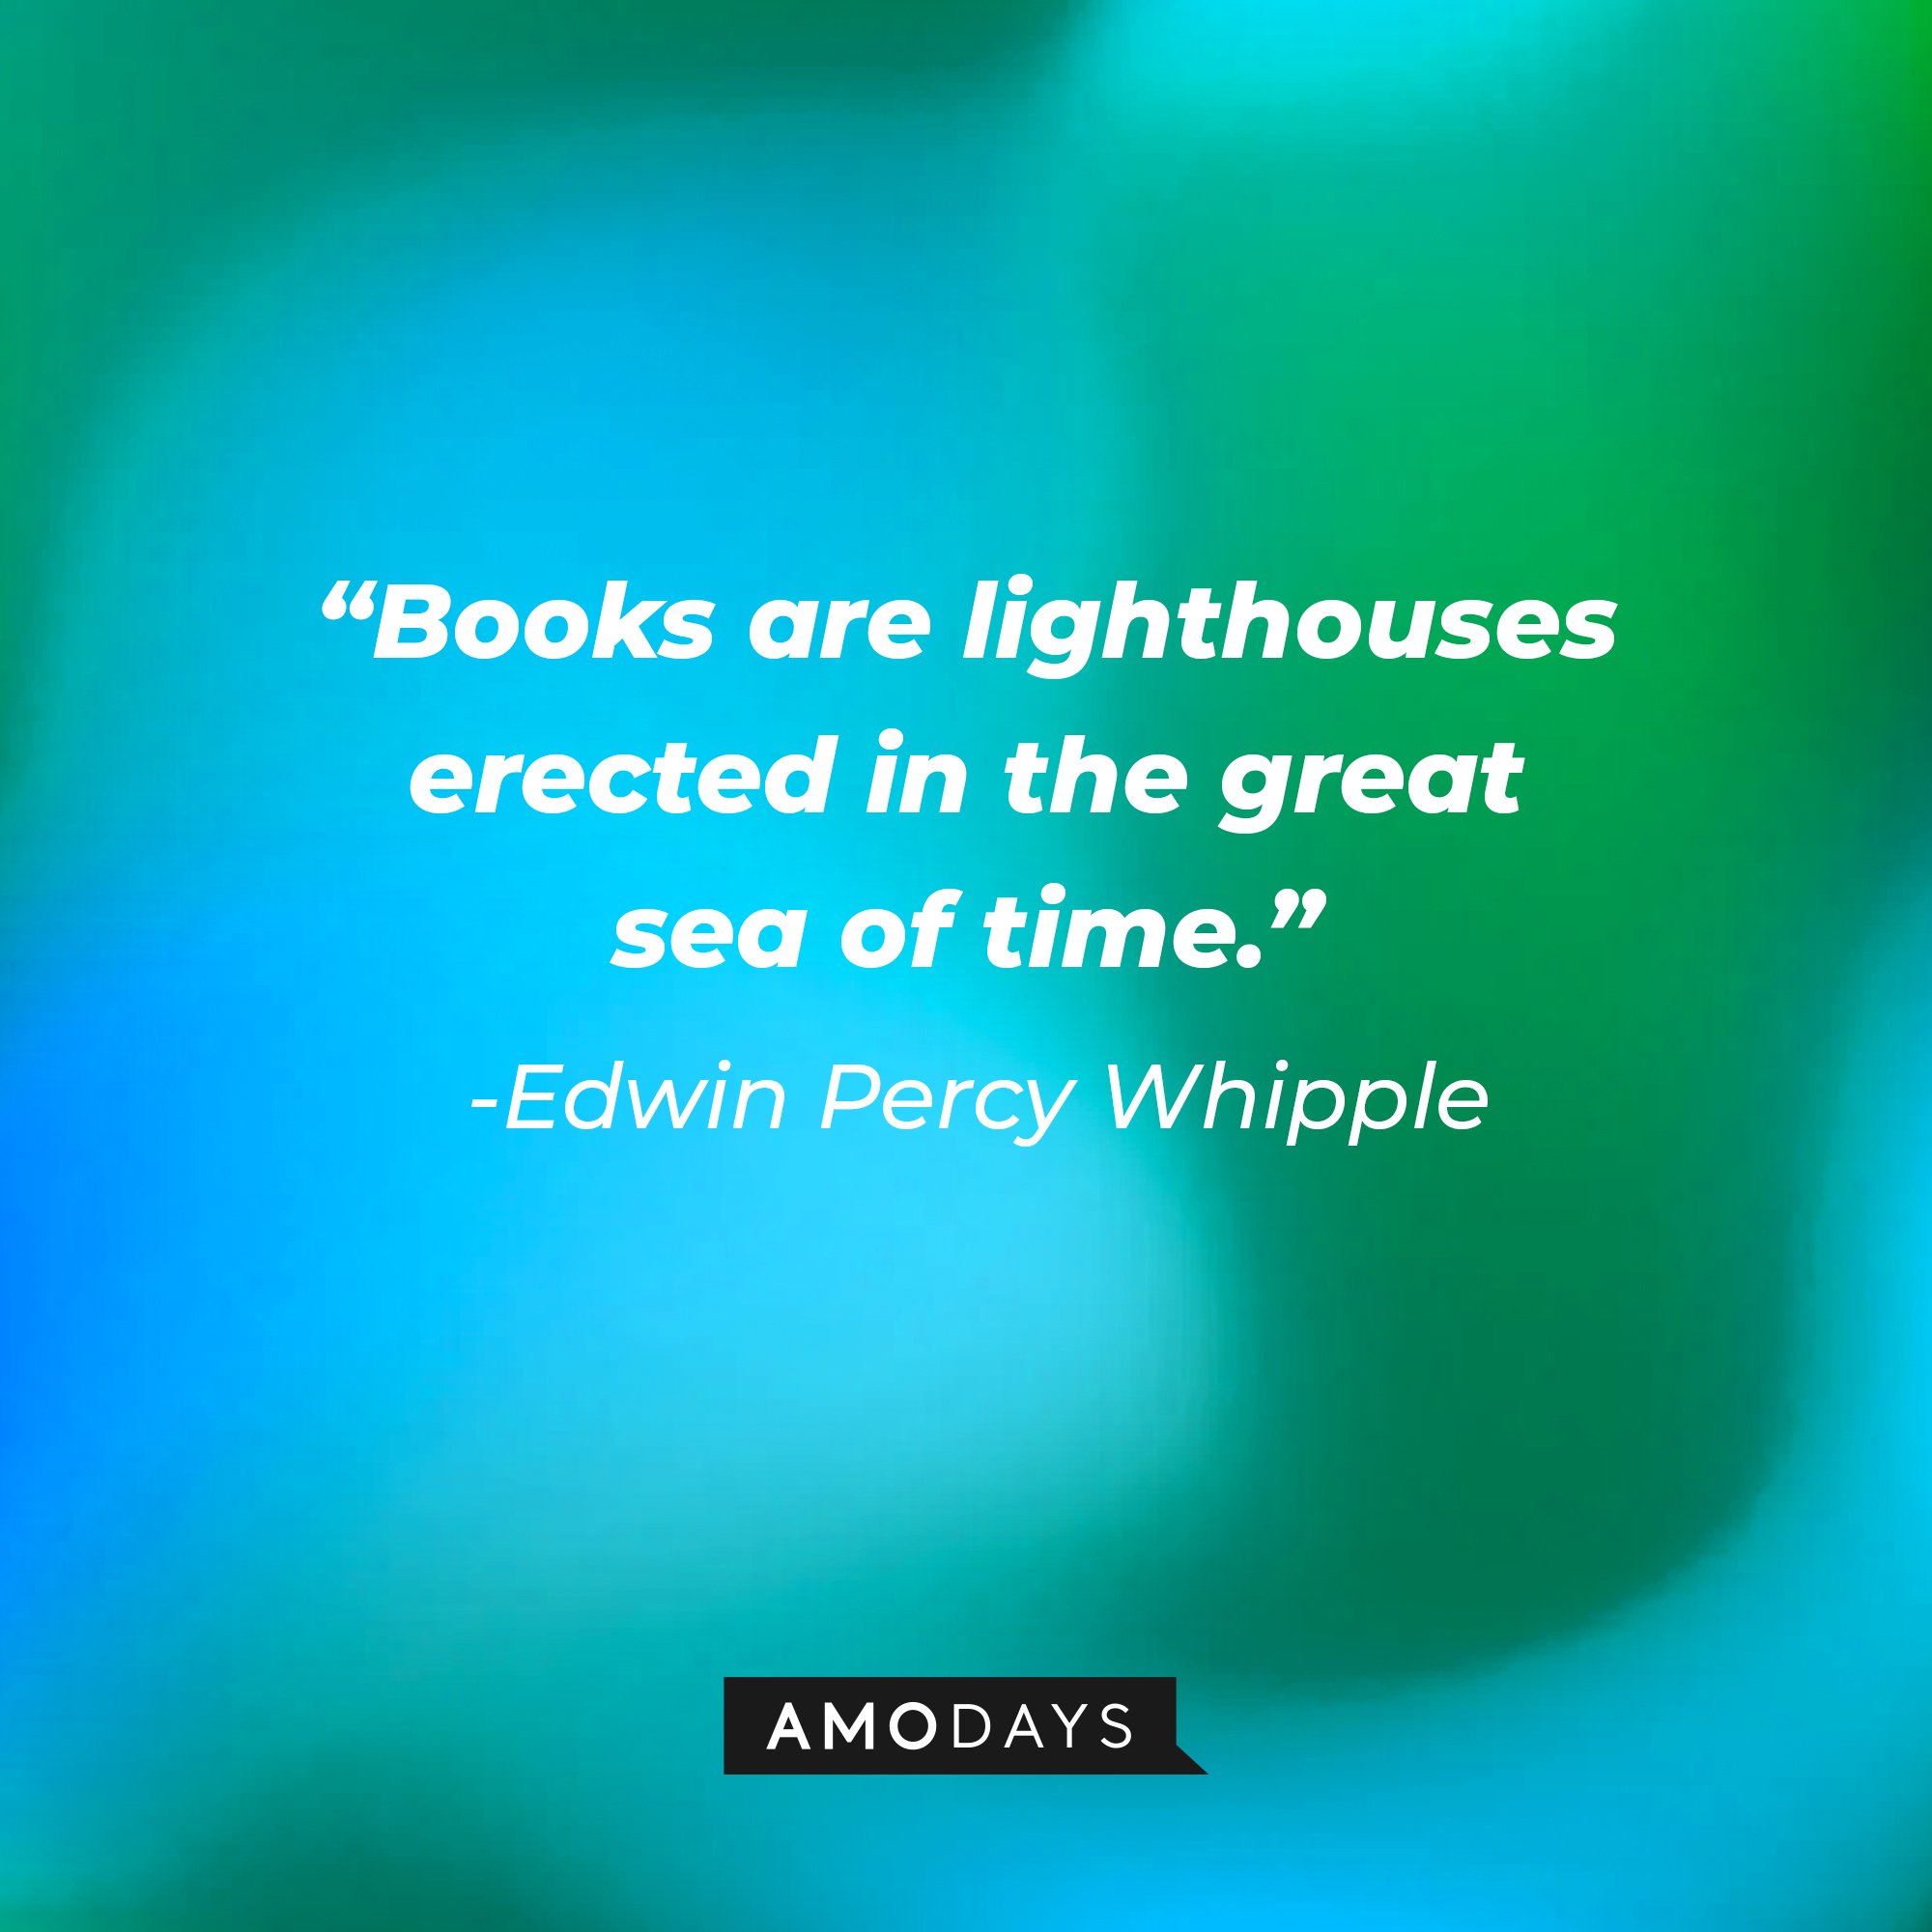 Edwin Percy Whipple’s quote: “Books are lighthouses erected in the great sea of time.” | Image: AmoDays 